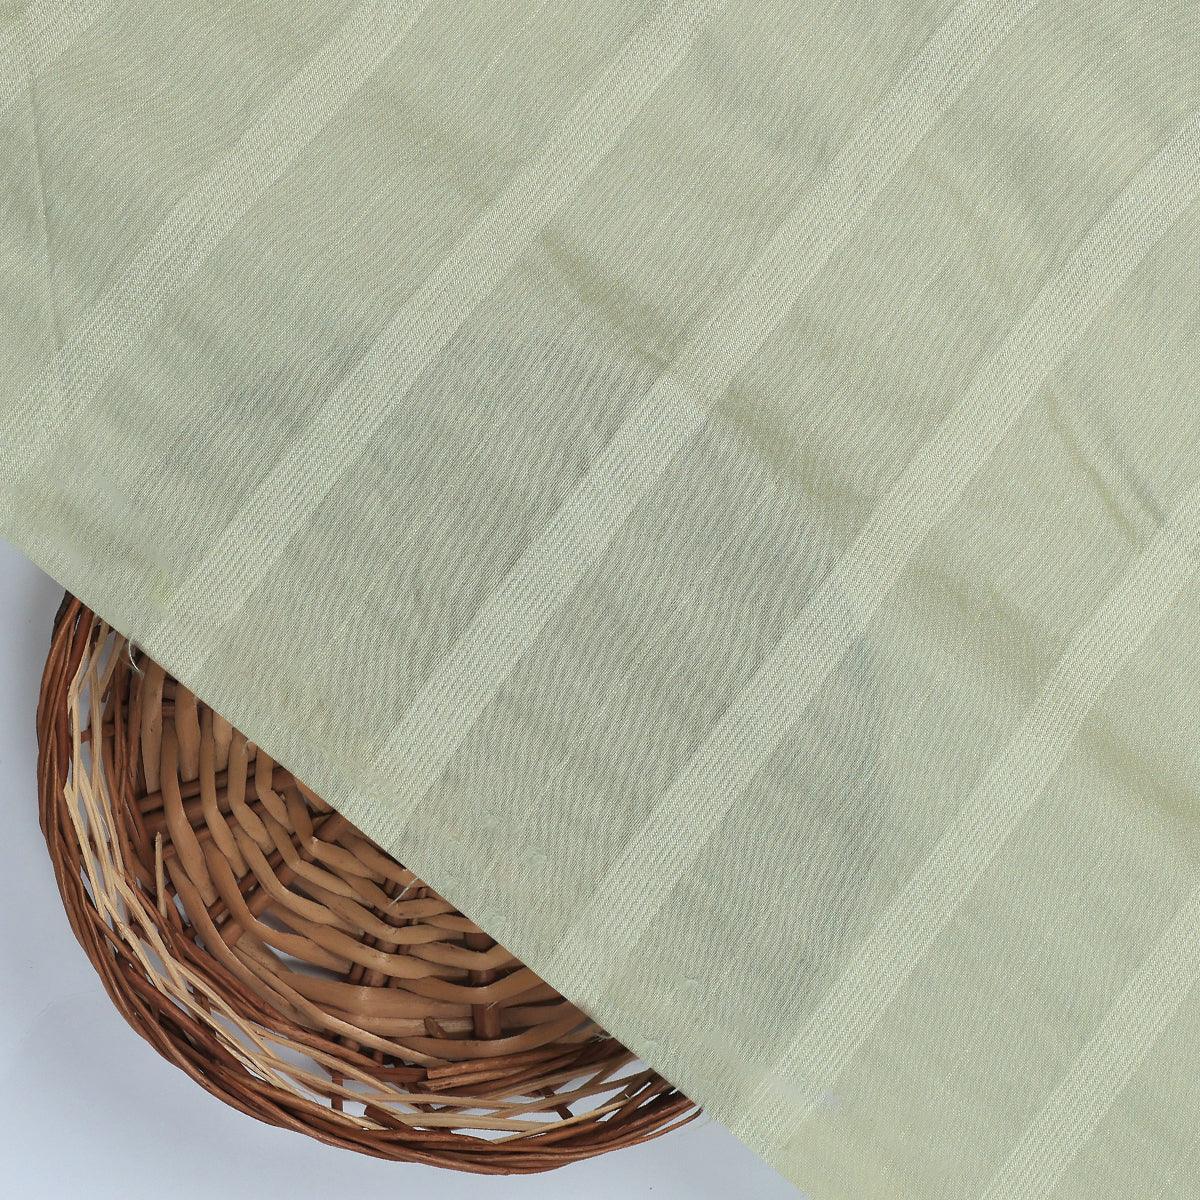 Pista Colour Bengal Stripes Self Patterned Dyed Fabric - FAB VOGUE Studio®